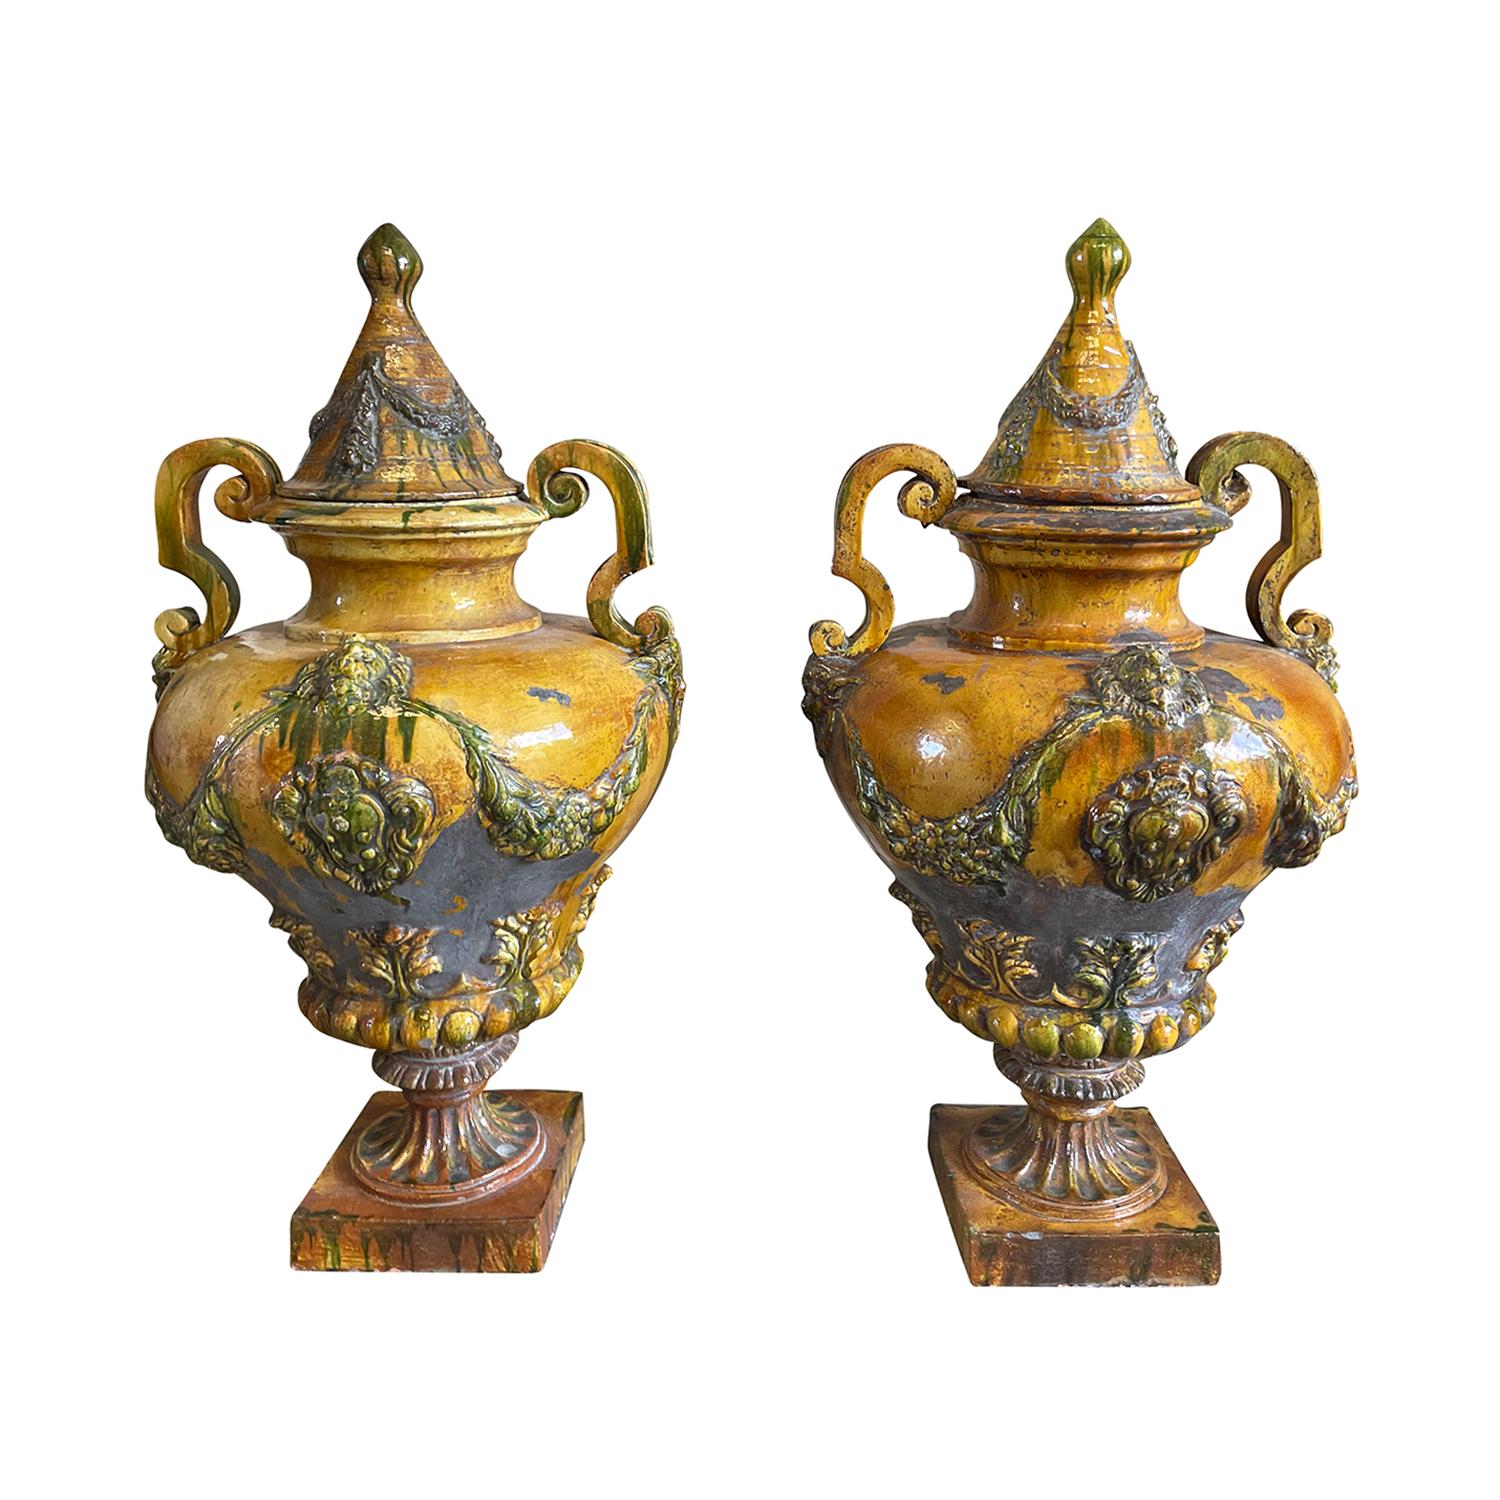 A pair of antique Italian double-handled baluster urns made of ceramic glazed in the 18th Century style in a warm honey yellow glaze with green accents, in good condition. These decorative garden ornaments are raised onto a square base. Wear